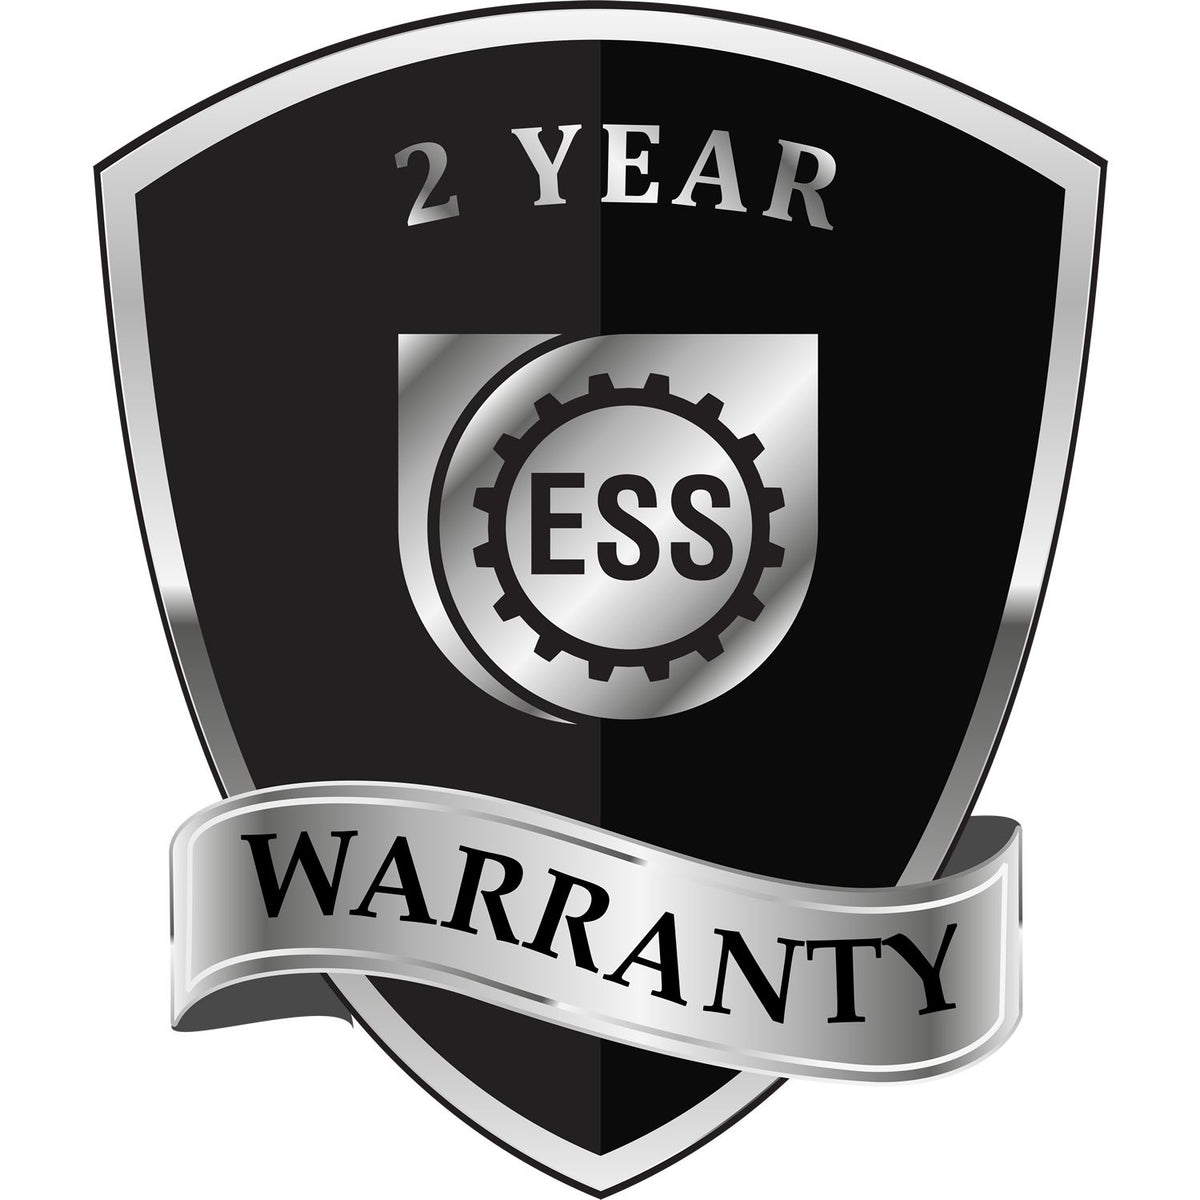 A badge or emblem showing a warranty icon for the Soft Pocket Wyoming Landscape Architect Embosser